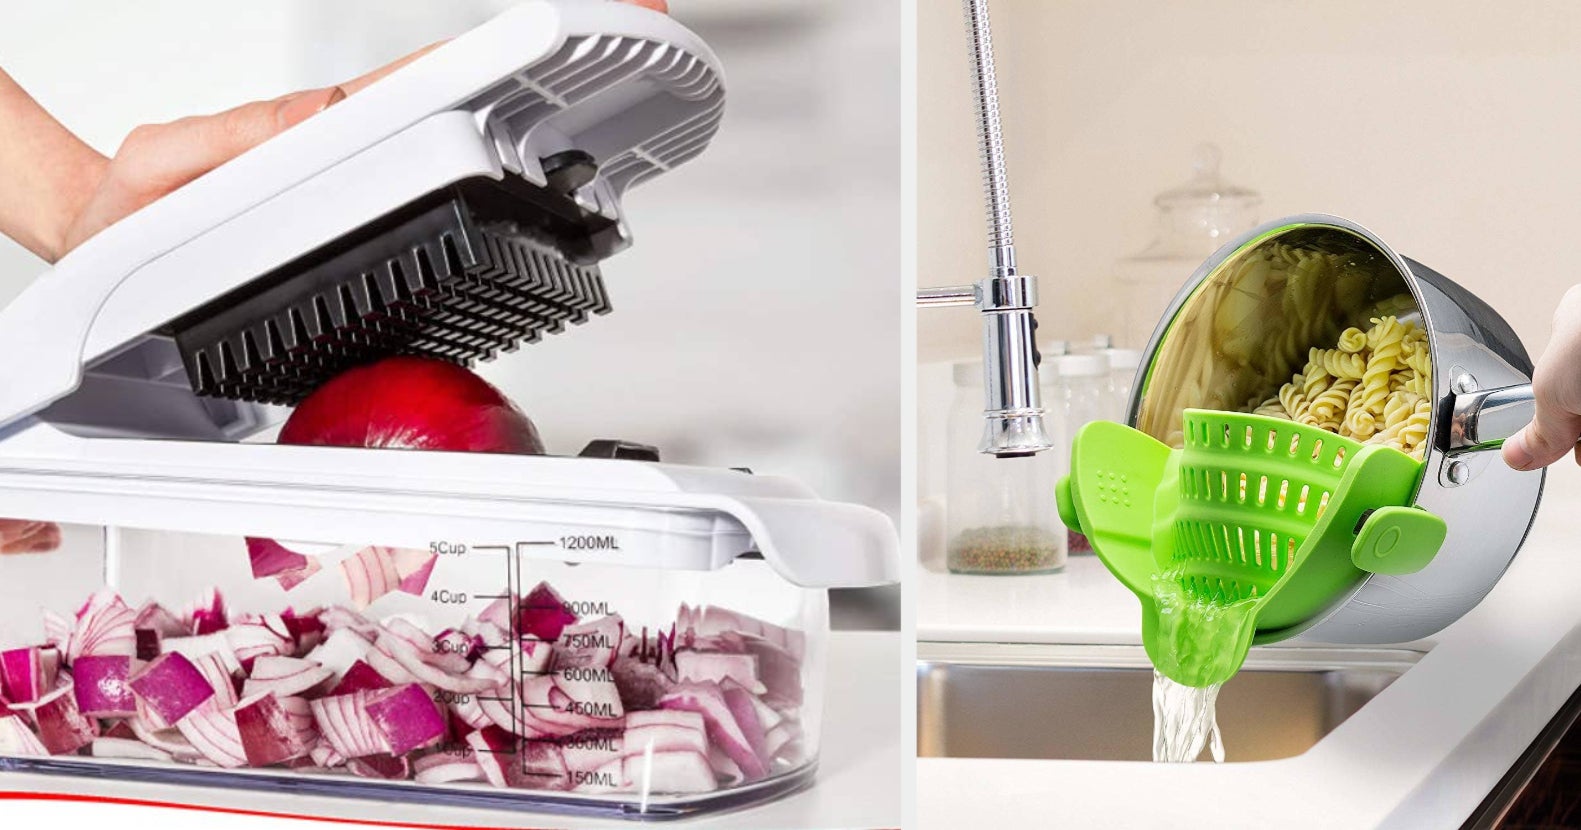 49 A+ Kitchen Gadgets For The Aspiring At-Home Chef